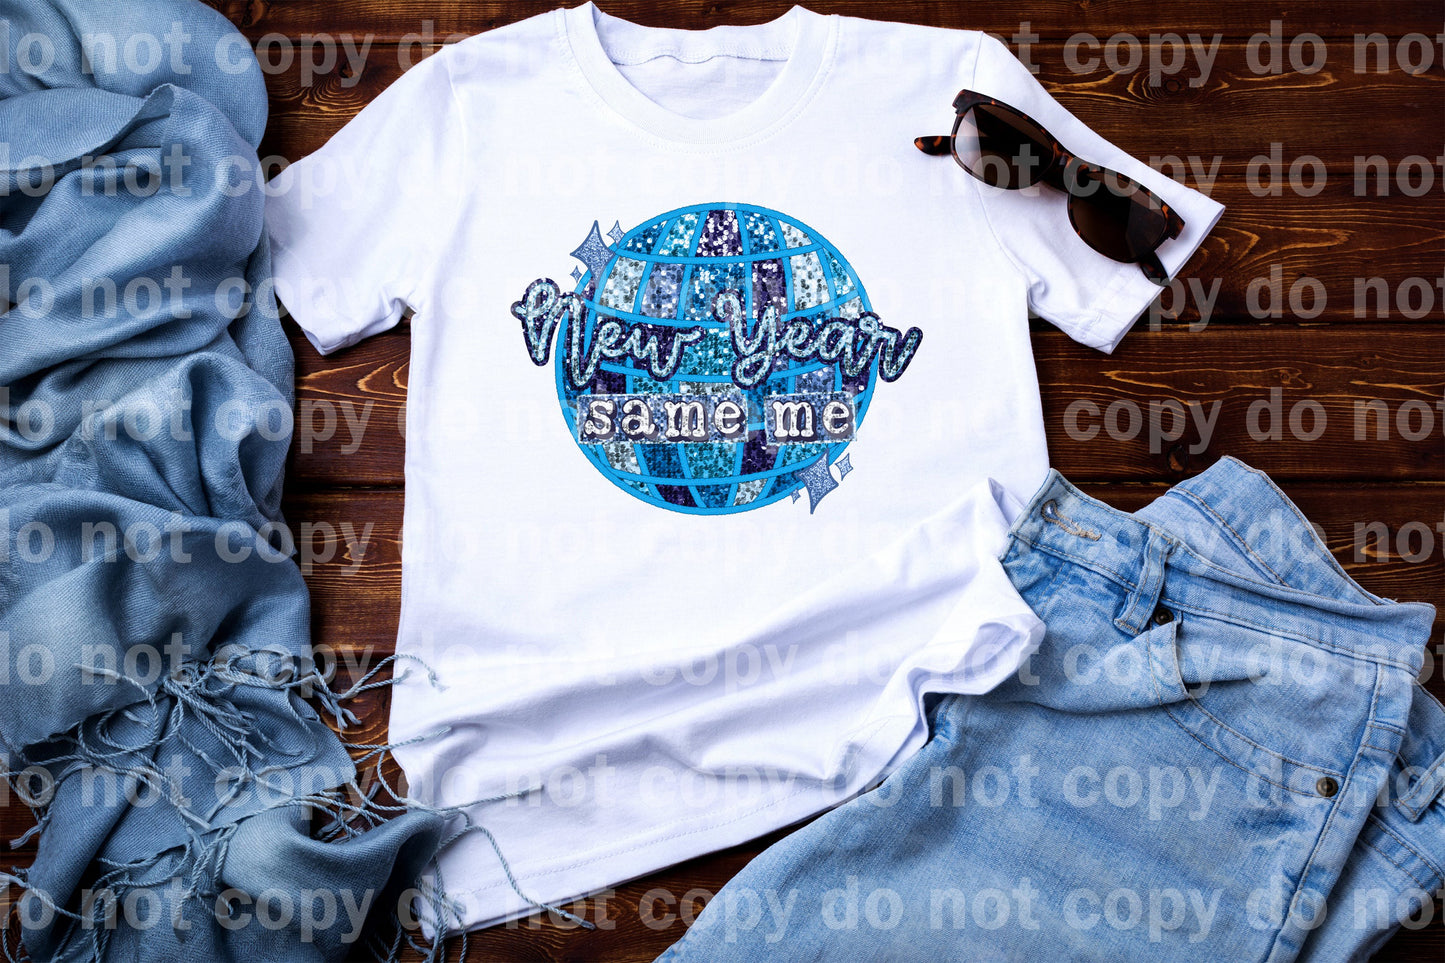 New Year Same Me Disco Ball with Optional Sleeve Design Dream Print or Sublimation Print